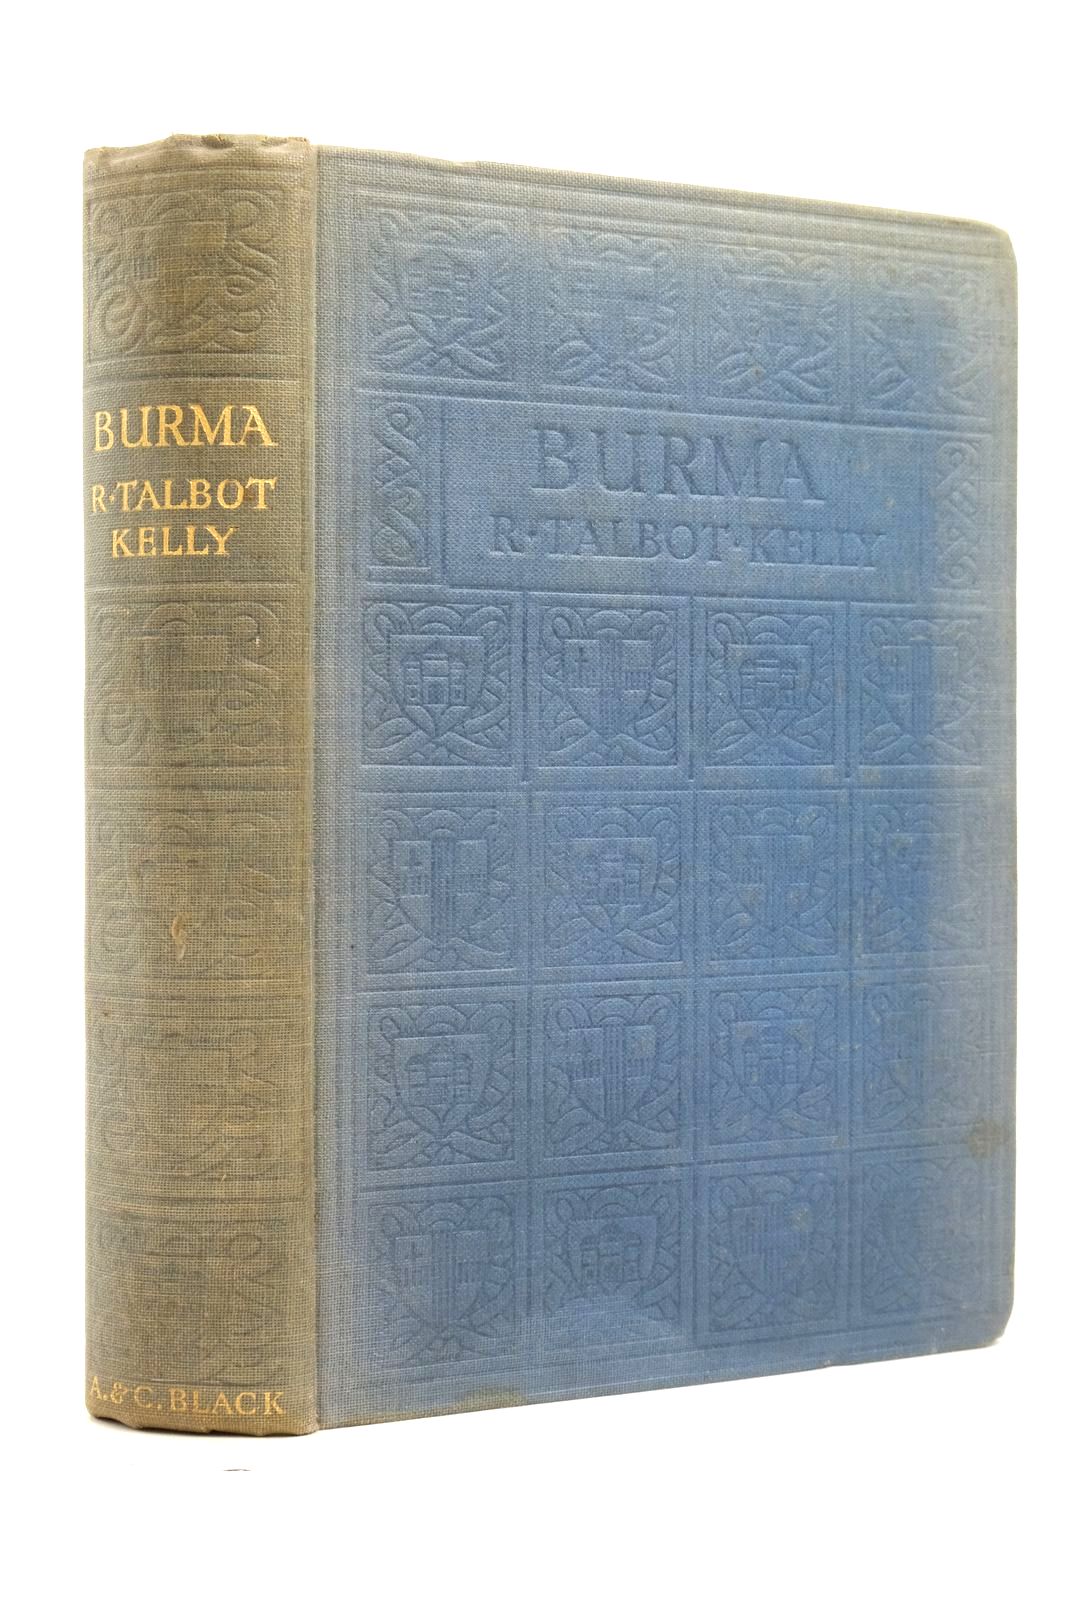 Photo of BURMA written by Kelly, R. Talbot illustrated by Kelly, R. Talbot published by Adam &amp; Charles Black (STOCK CODE: 2137337)  for sale by Stella & Rose's Books